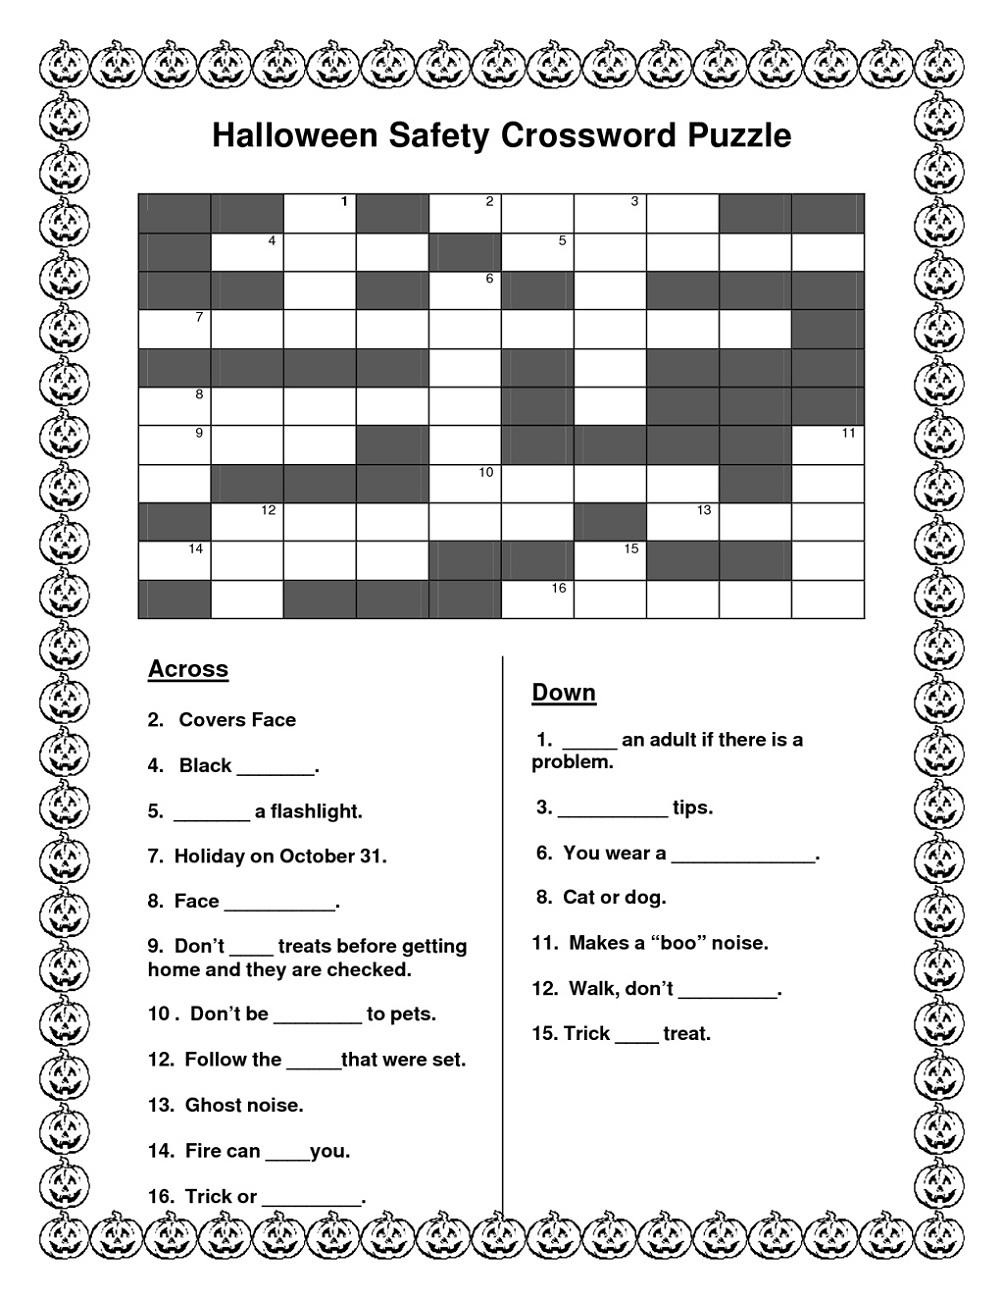 Free Crosswords For Kids | Activity Shelter - Halloween Crossword Puzzles For Adults Printable